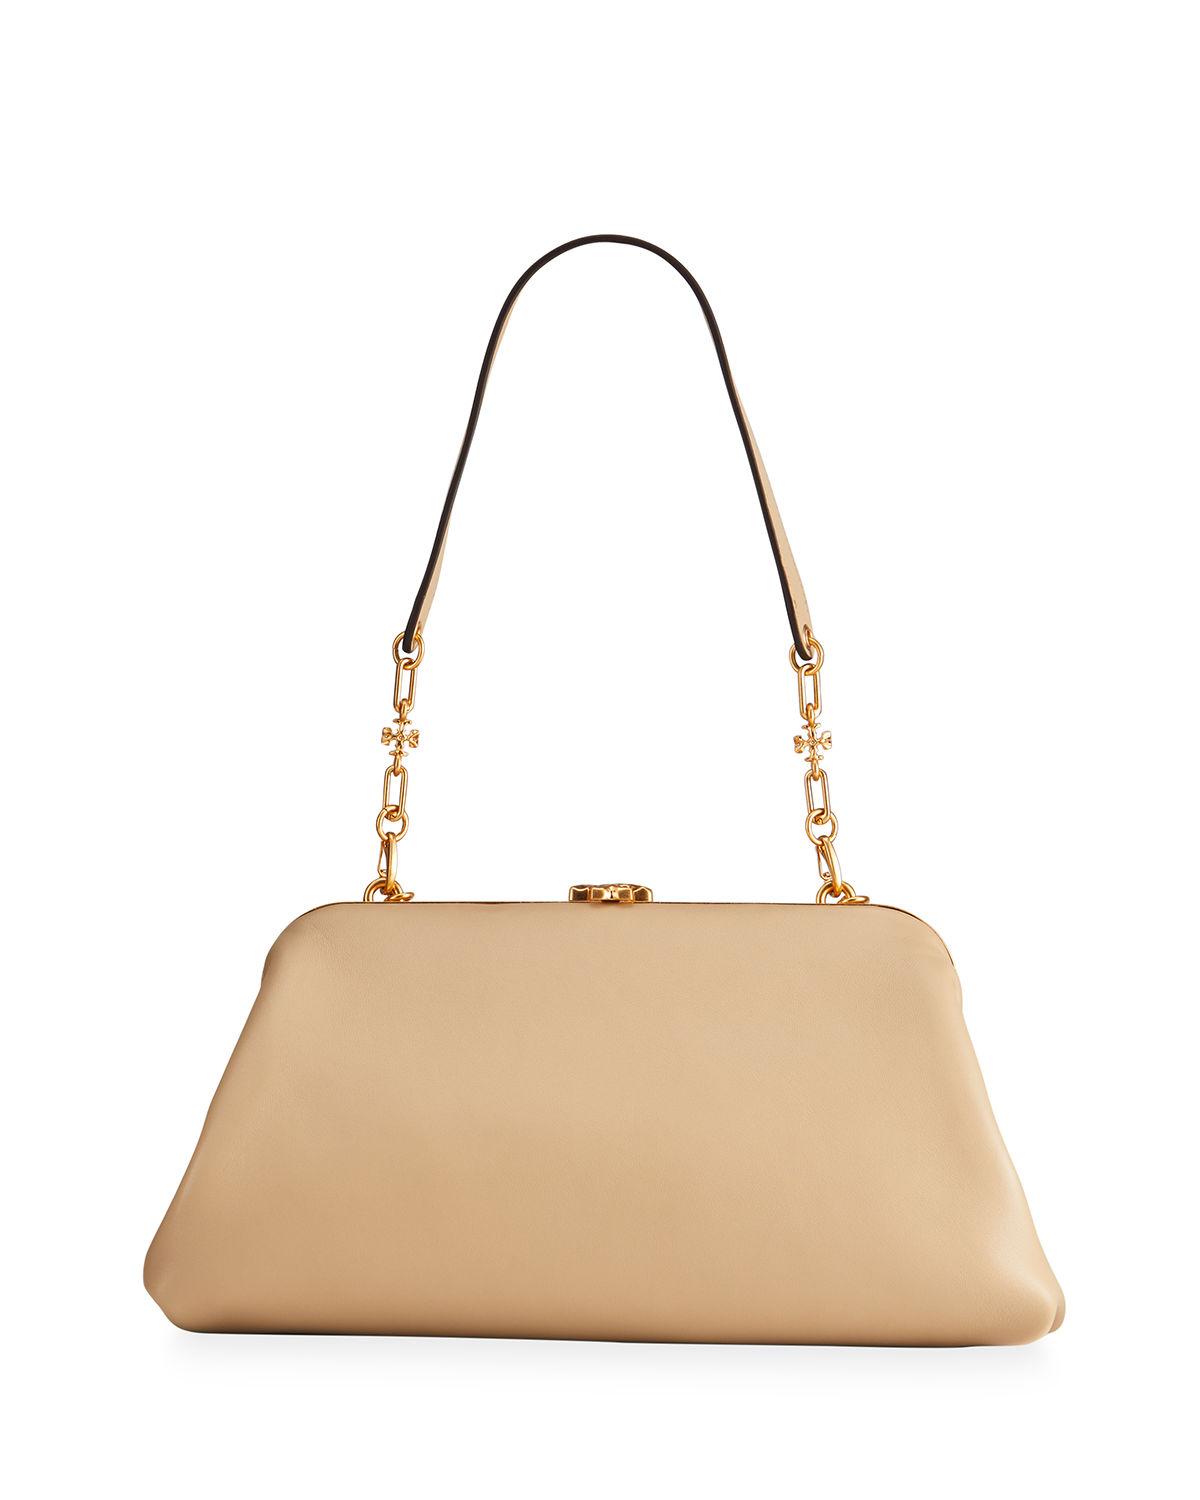 Tory Burch Cleo Bag in Natural | Lyst